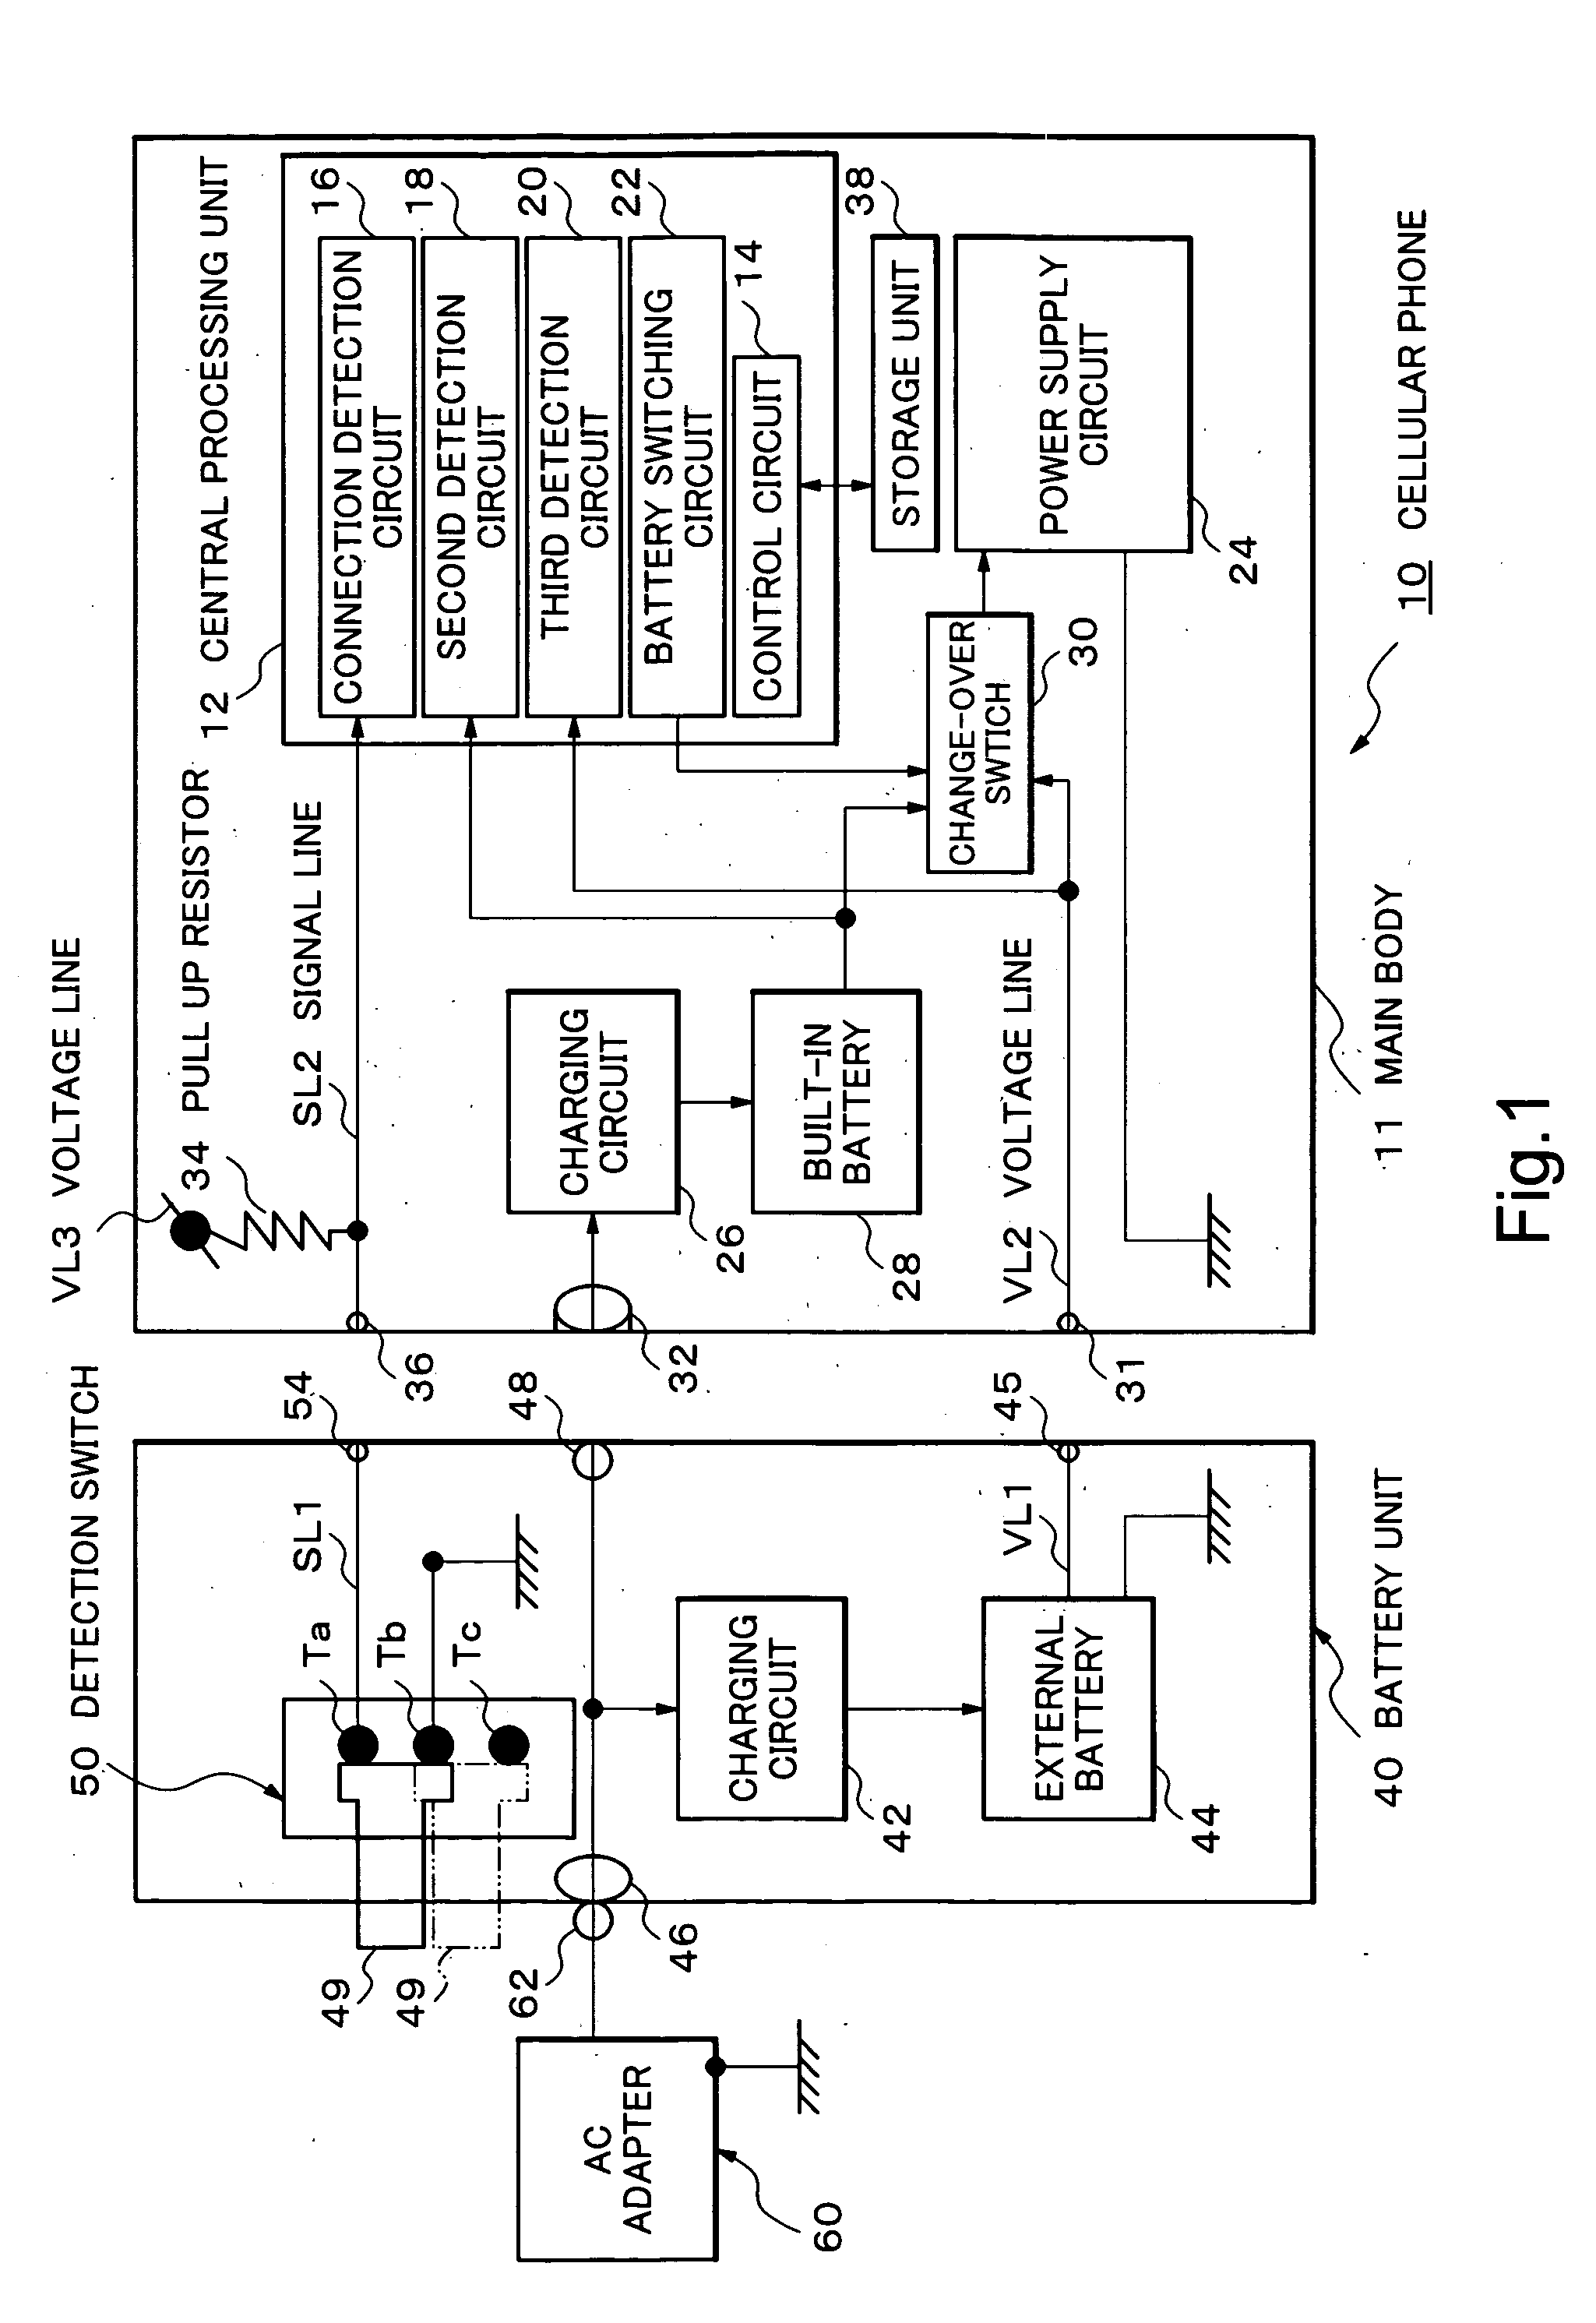 Power apparatus and electronic equipment